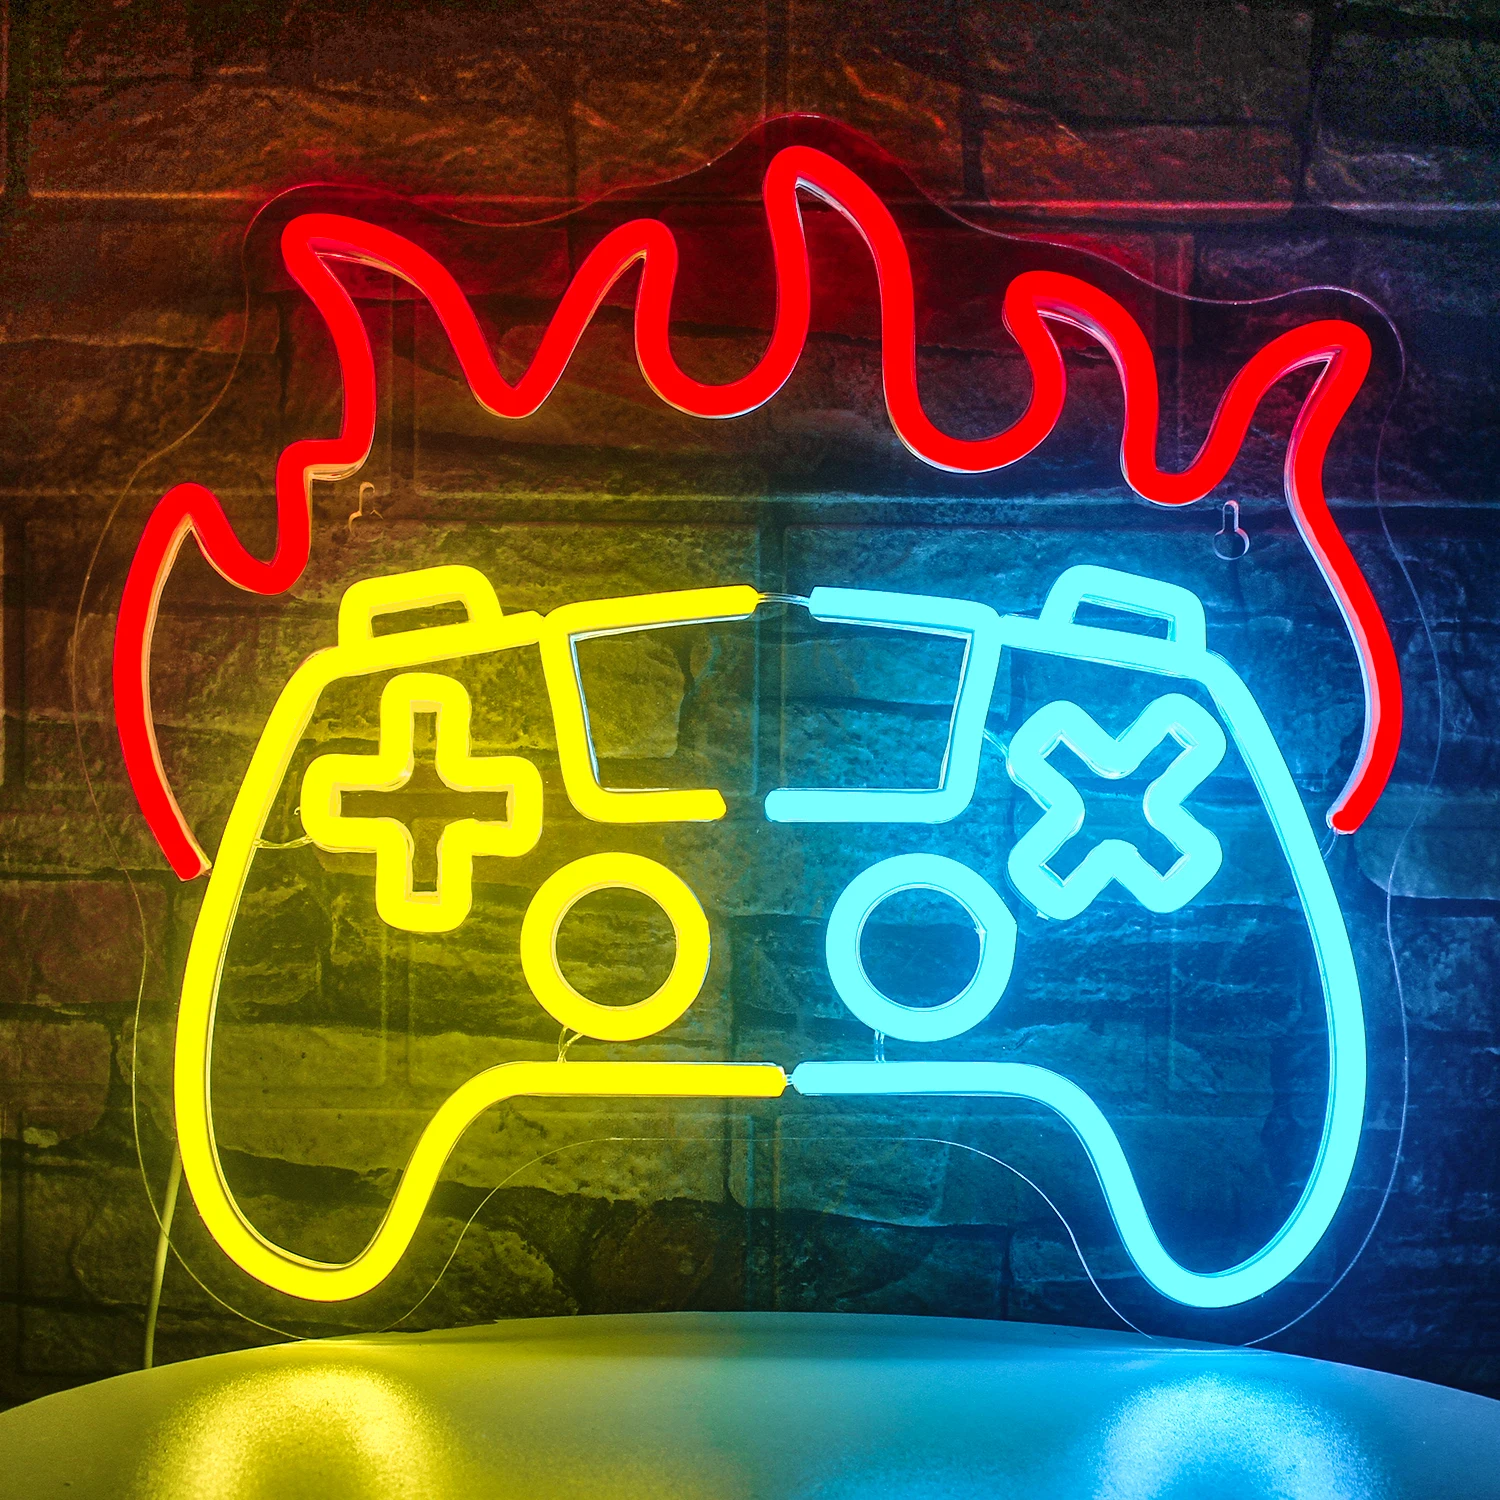 

Fire Gamepad Neon Sign Led Lights Color Mix Logo USB Powered Gamer Room Decoration Neon Wall Lamp For Bedroom Game Lighting Gift